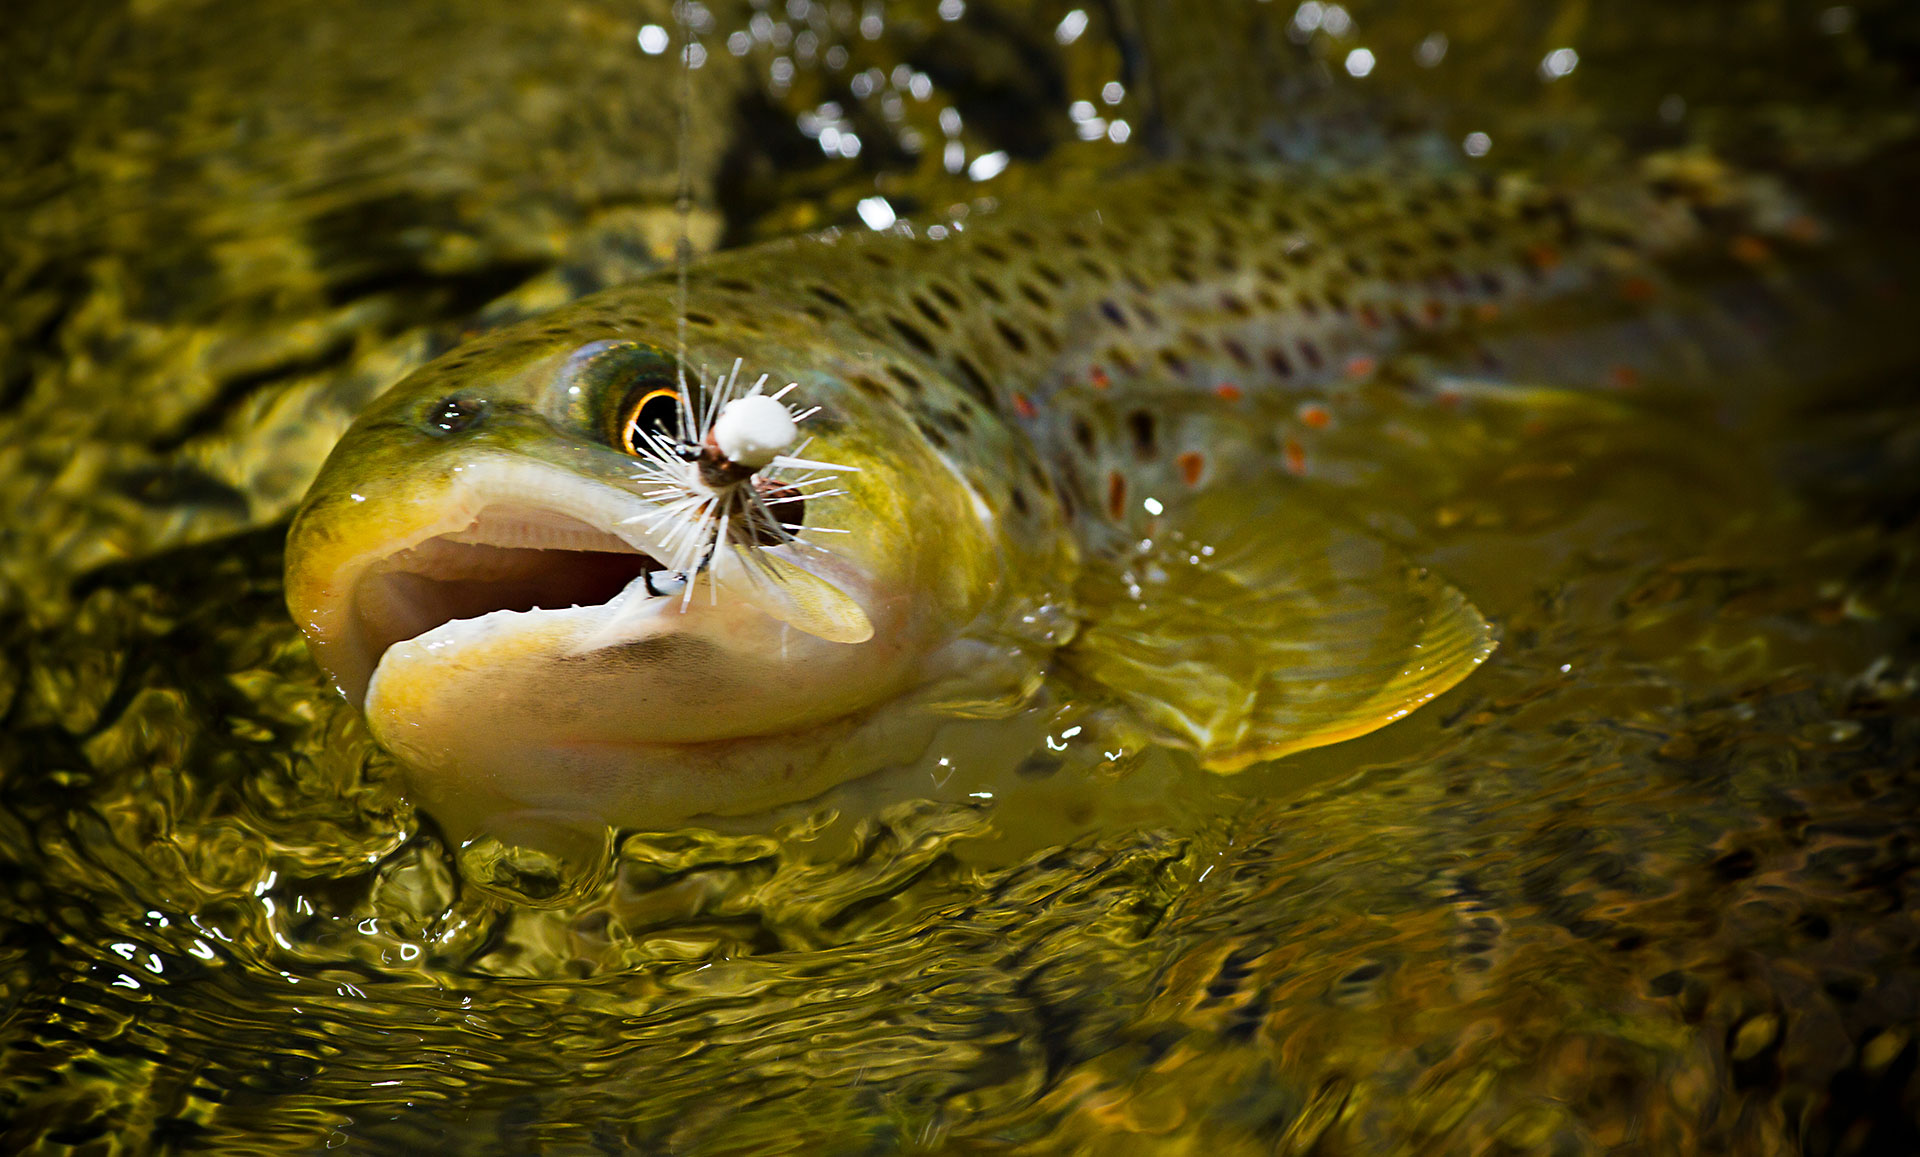 Browse Our New Gallery Of Fly Fishing Wallpaper To For